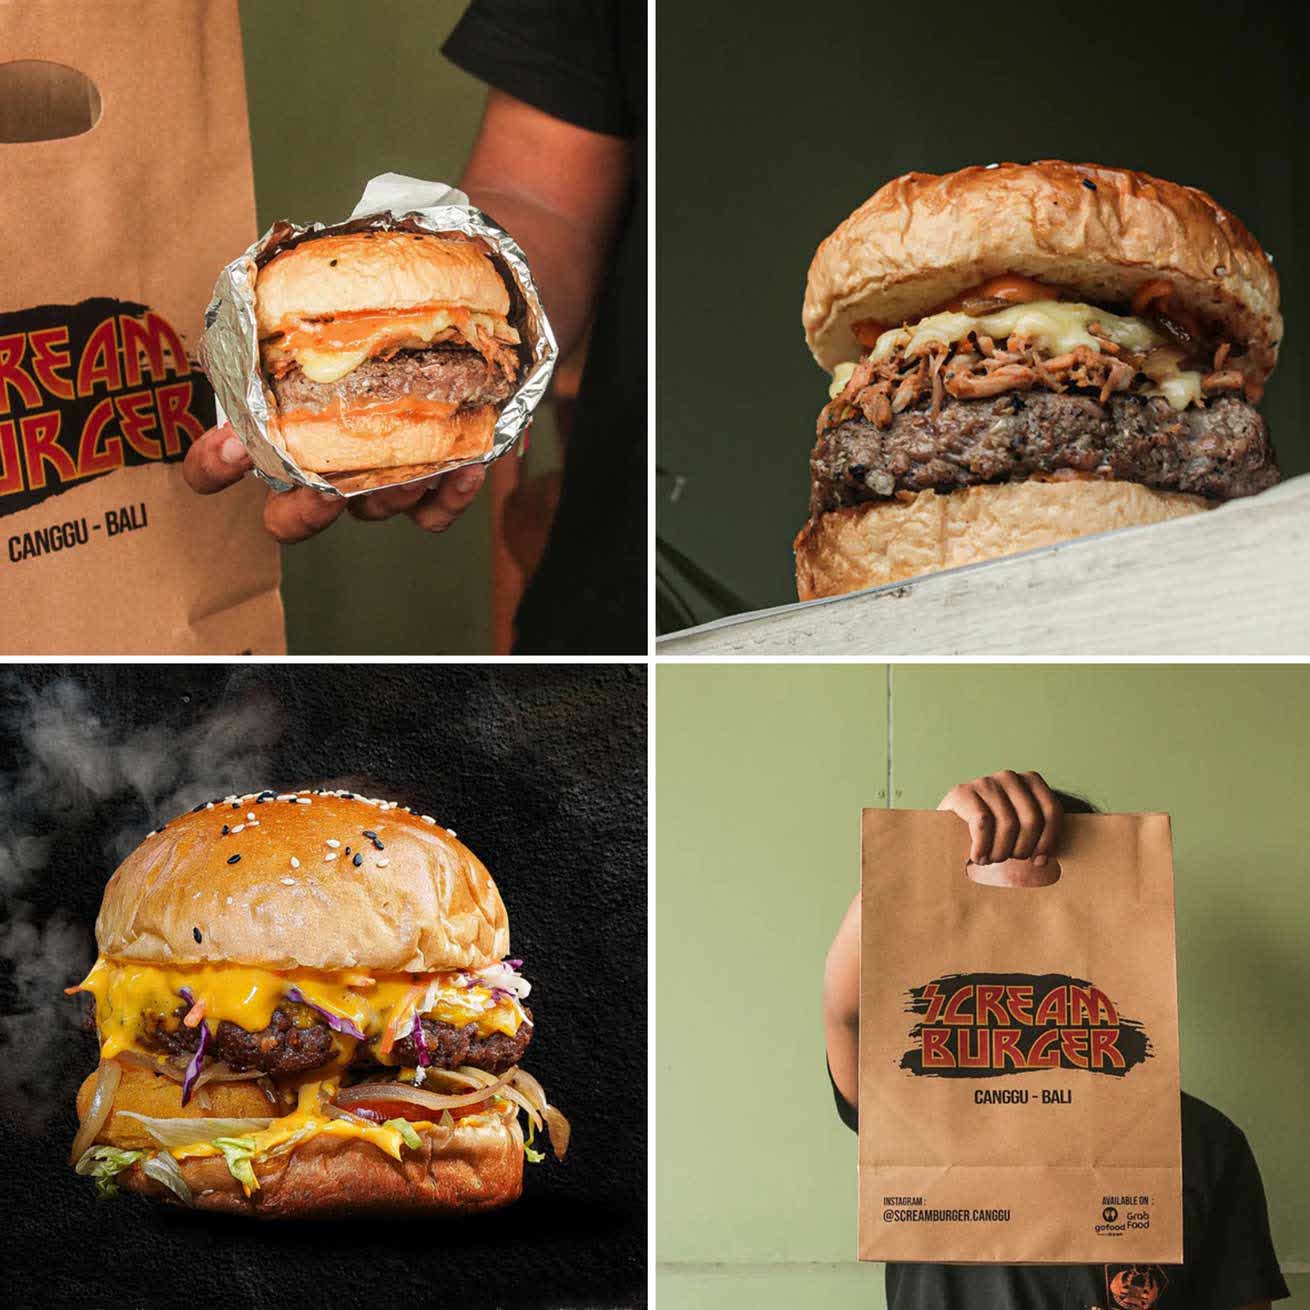 The range of different burgers from Scream Burger